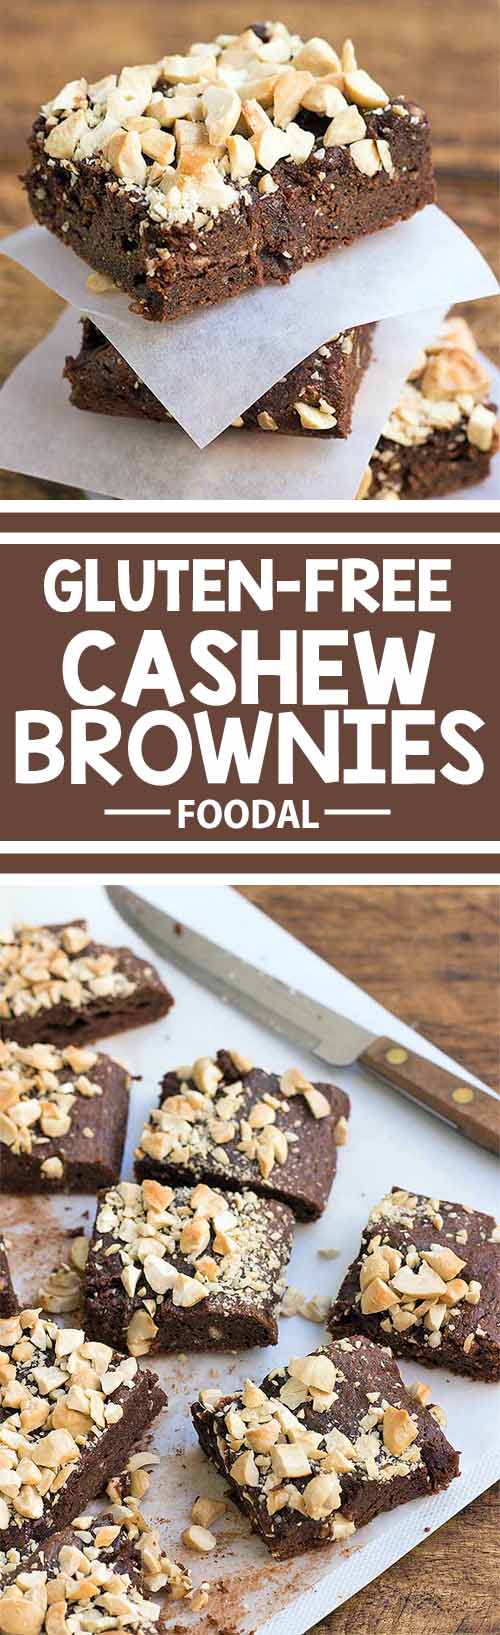 Do you love chocolate and need something to satisfy your sweet tooth? These gluten-free brownies are moist, chocolatey, and topped with crunchy cashews for contrast in color and texture. Best of all, a batch can be made in just 35 minutes! Get the recipe on Foodal now and make a batch of these brownies today!